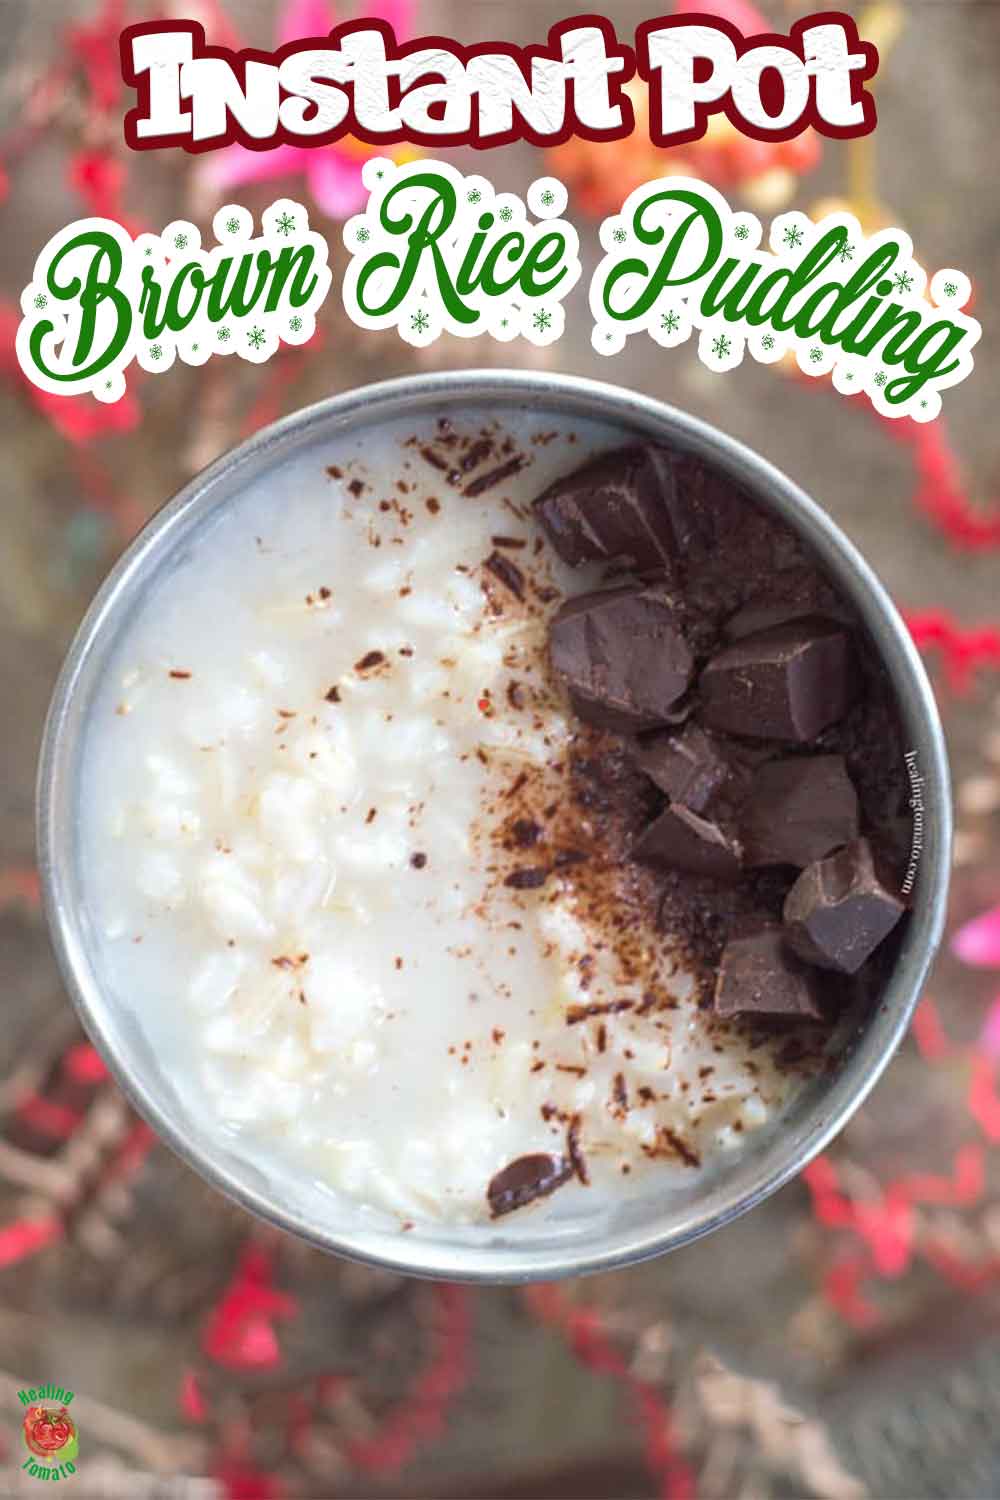 Top view and closeup of a silver cup filled with brown rice and garnished with chocolate cubes